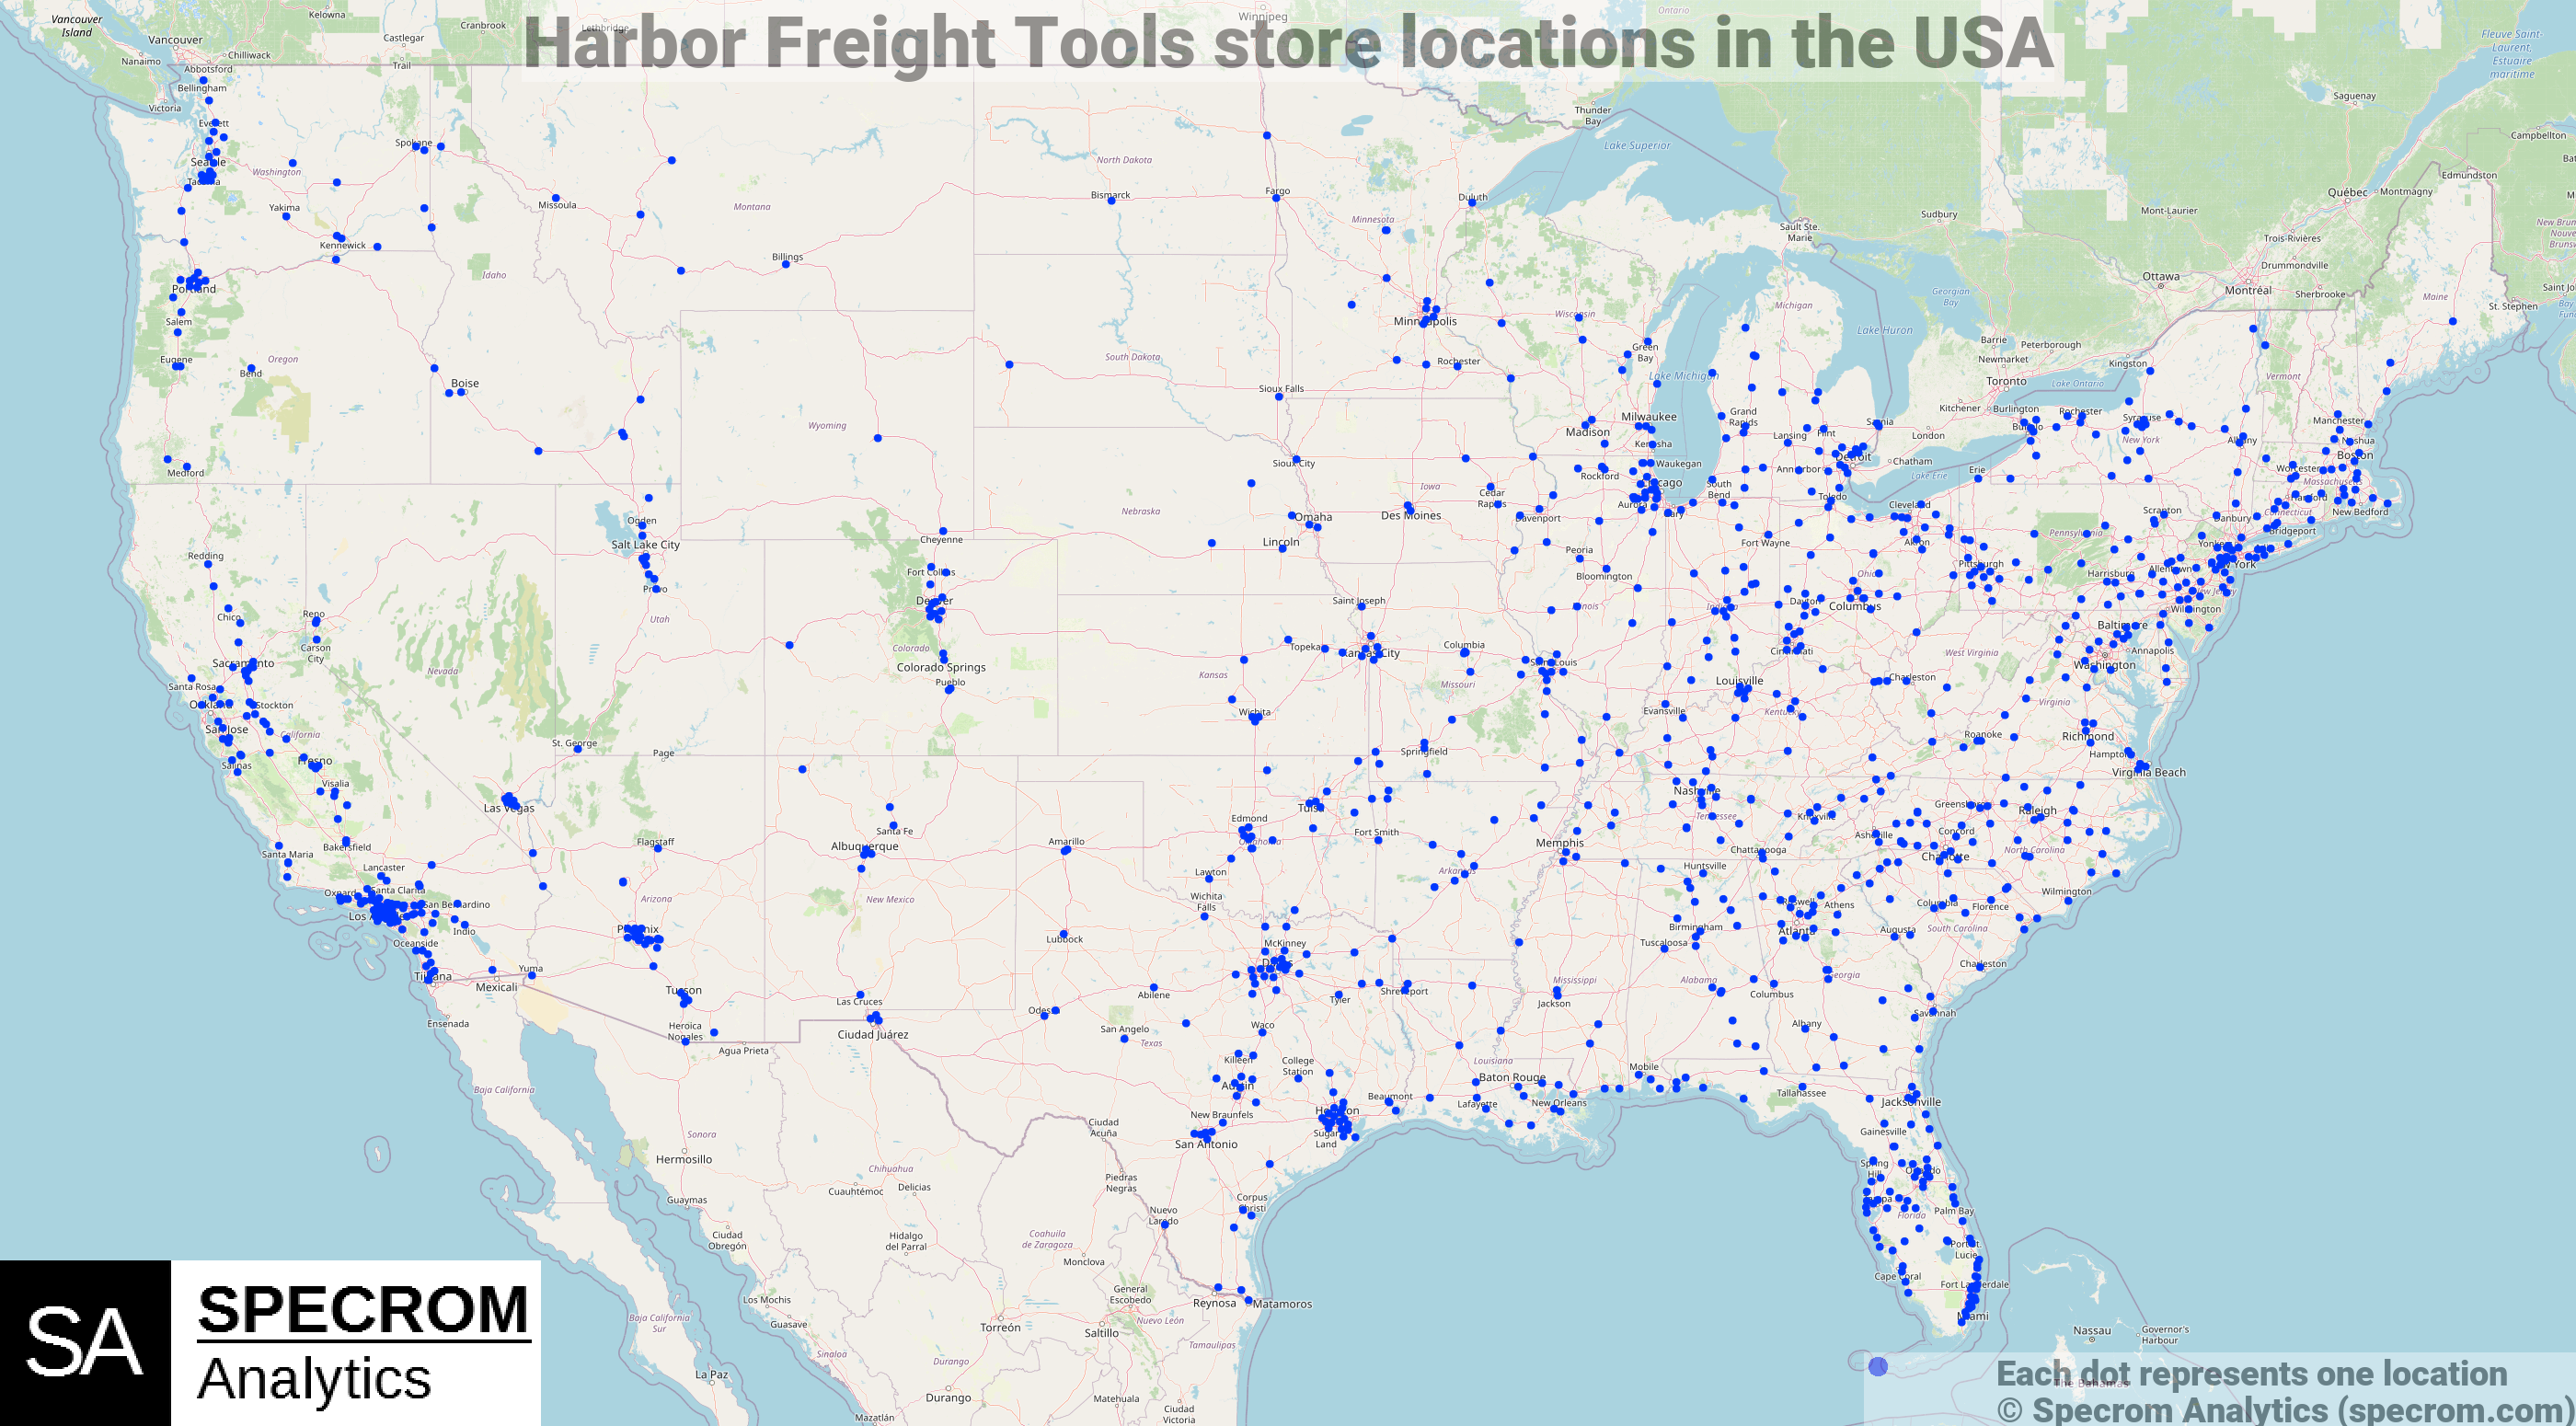 Harbor Freight Tools store locations in the USA